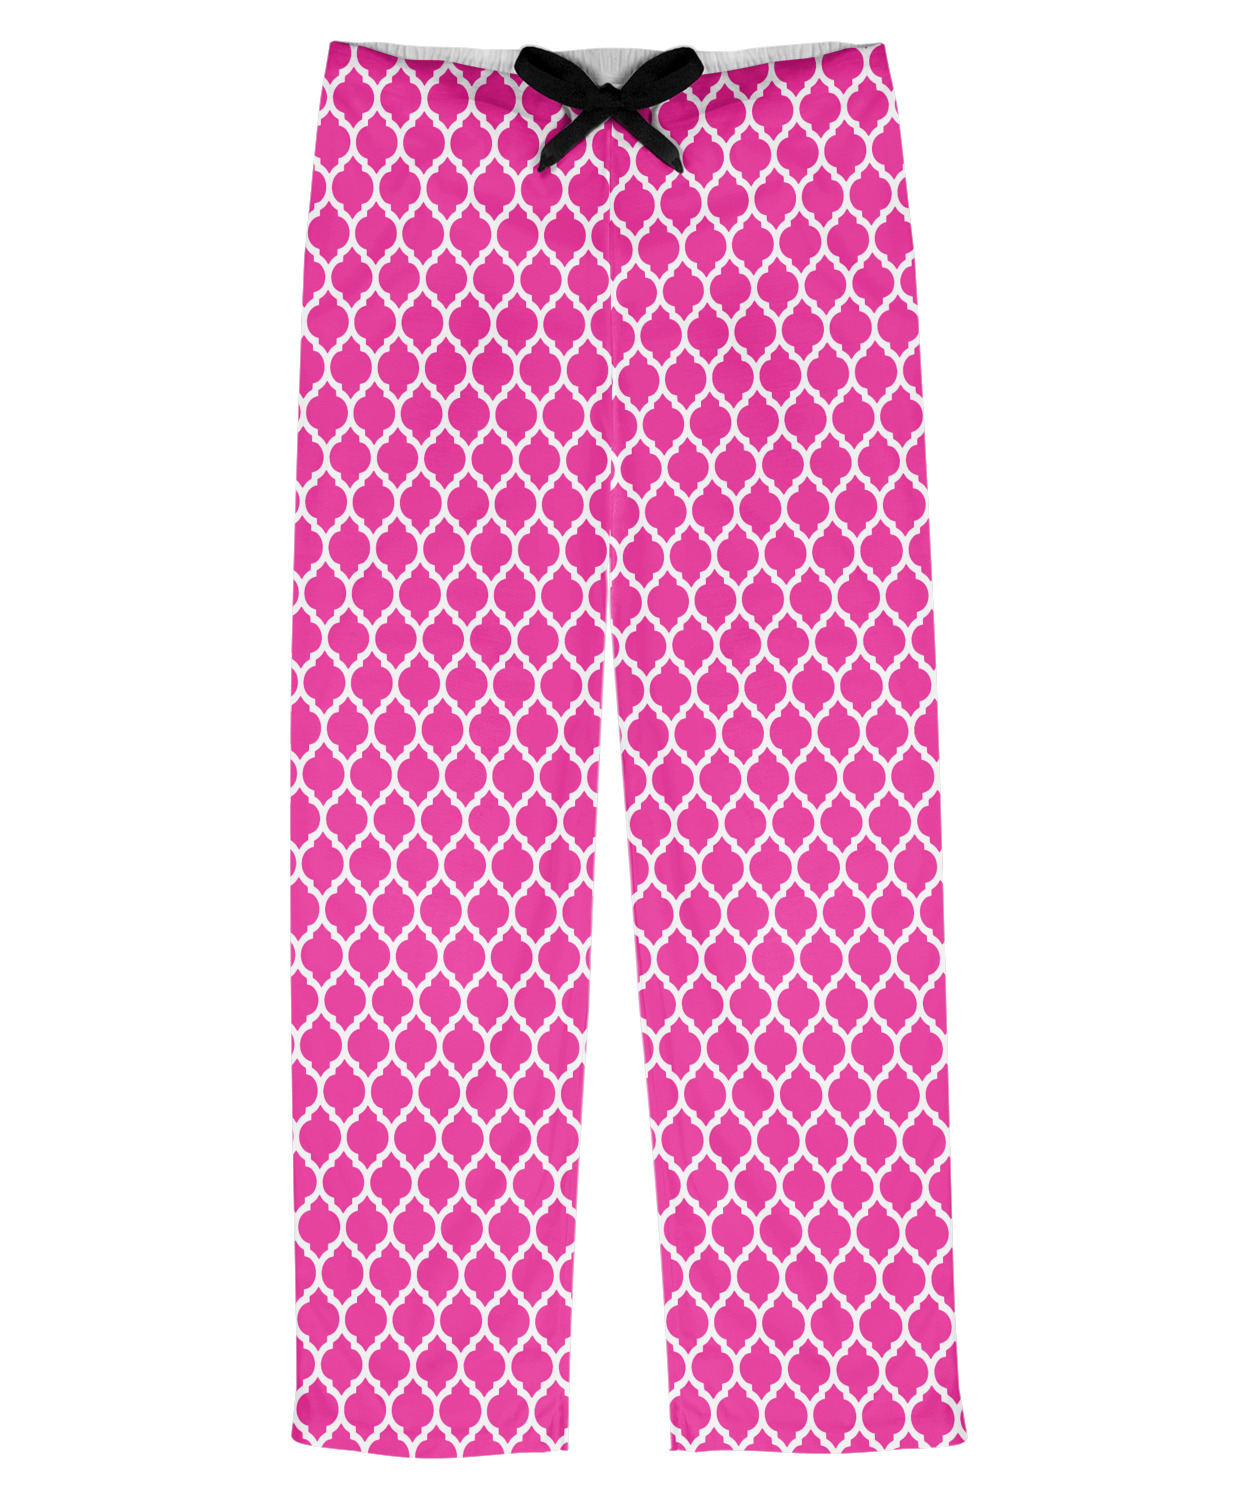 Moroccan Mens Pajama Pants - L (Personalized) - YouCustomizeIt